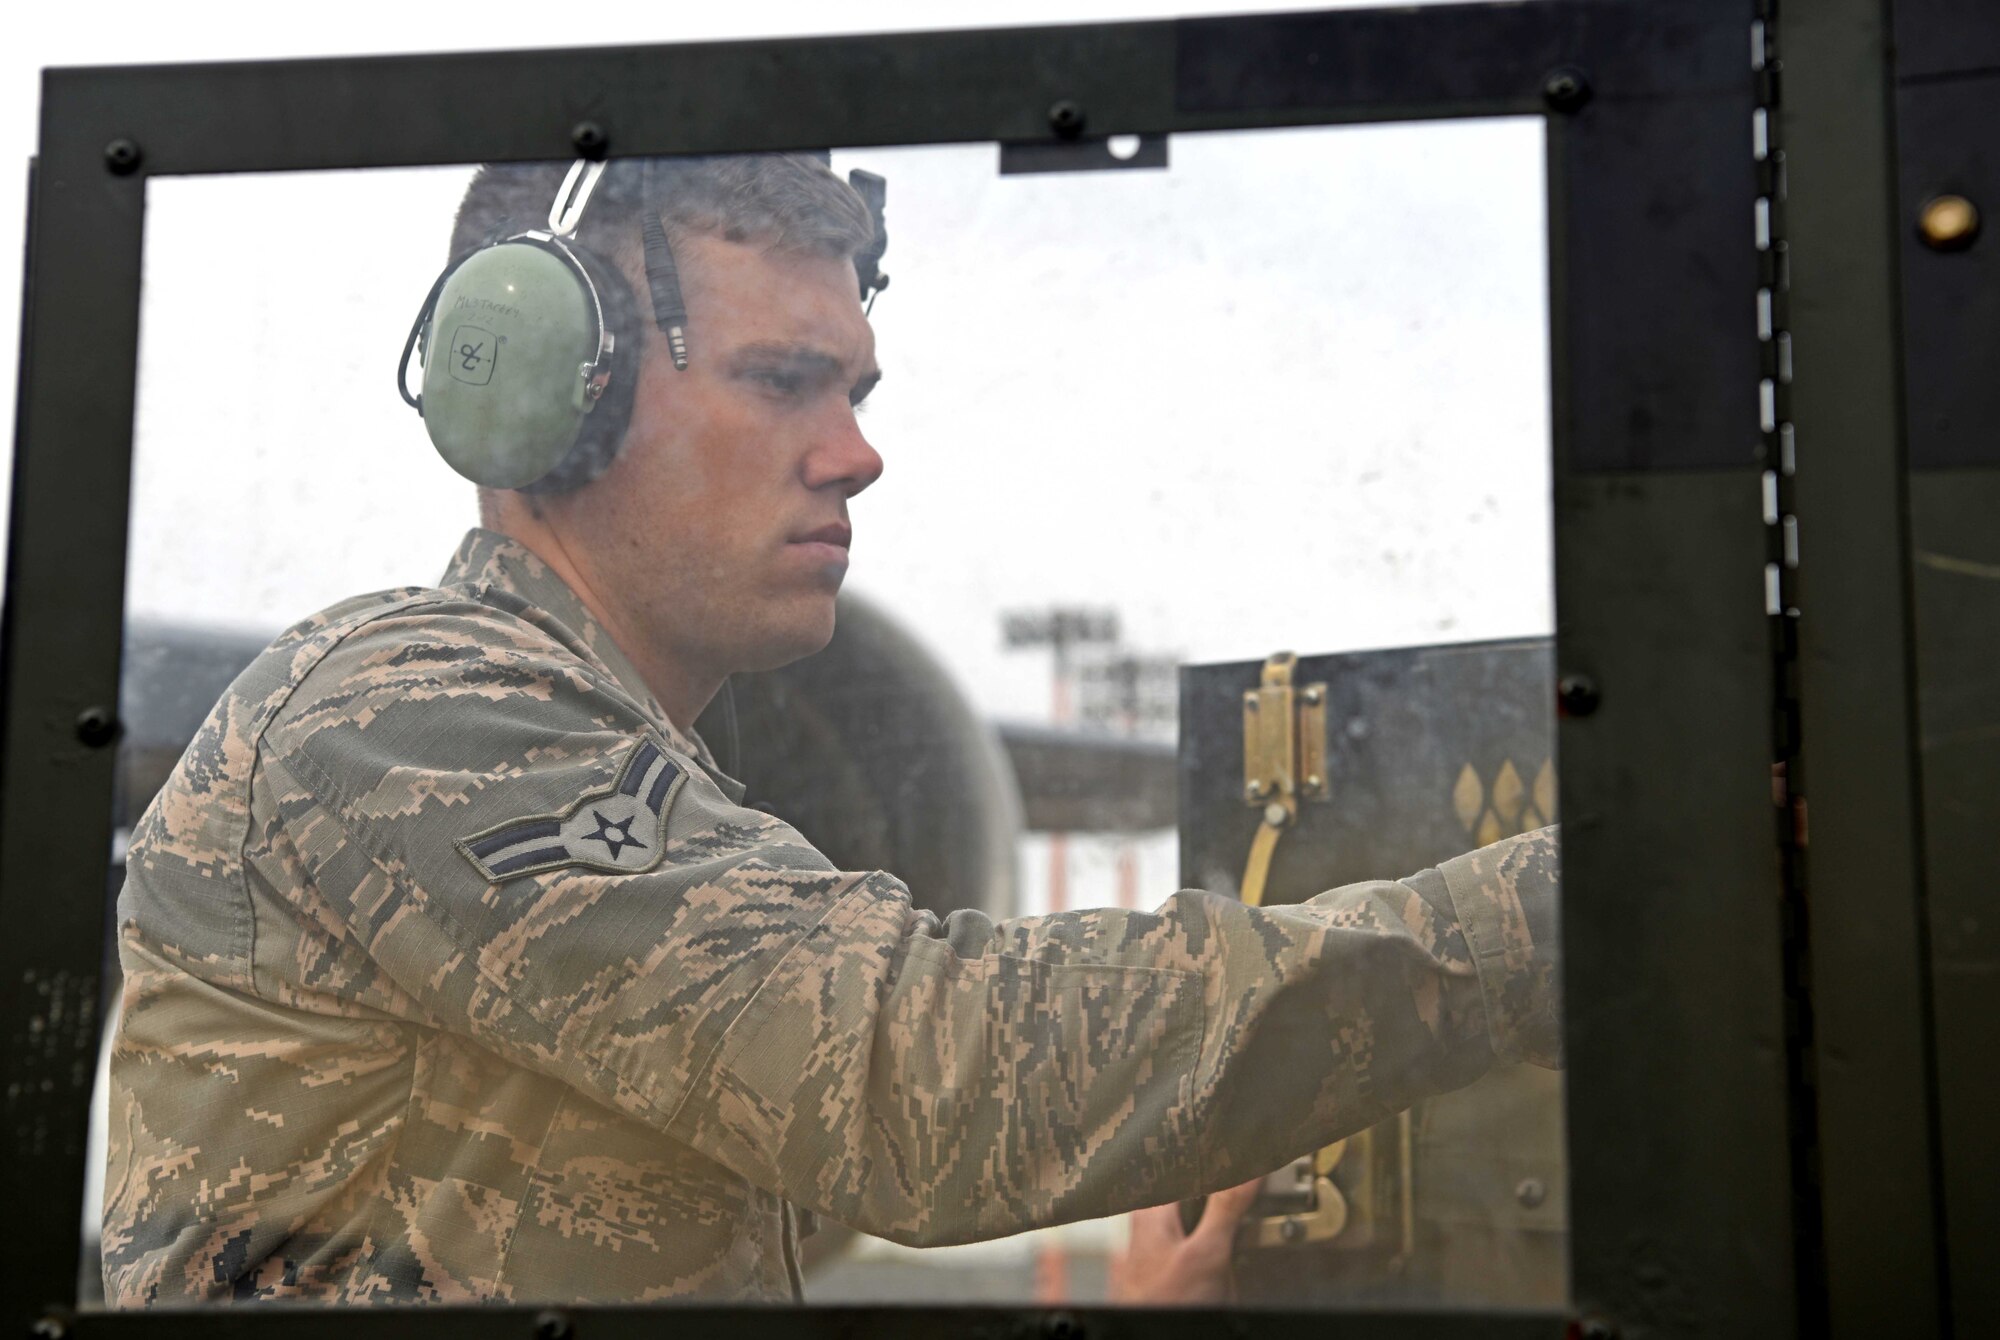 Airman 1st Class David Lyle, 100th Aircraft Maintenance Squadron crew chief, performs pre-flight checks during a readiness exercise at RAF Mildenhall, England, Oct. 3, 2019. Exercise scenarios were designed to ensure 100th Air Refueling Wing Airmen were fully prepared for potential contingencies in the wing’s area of responsibility. (U.S. Air Force photo by Airman 1st Class Brandon Esau)